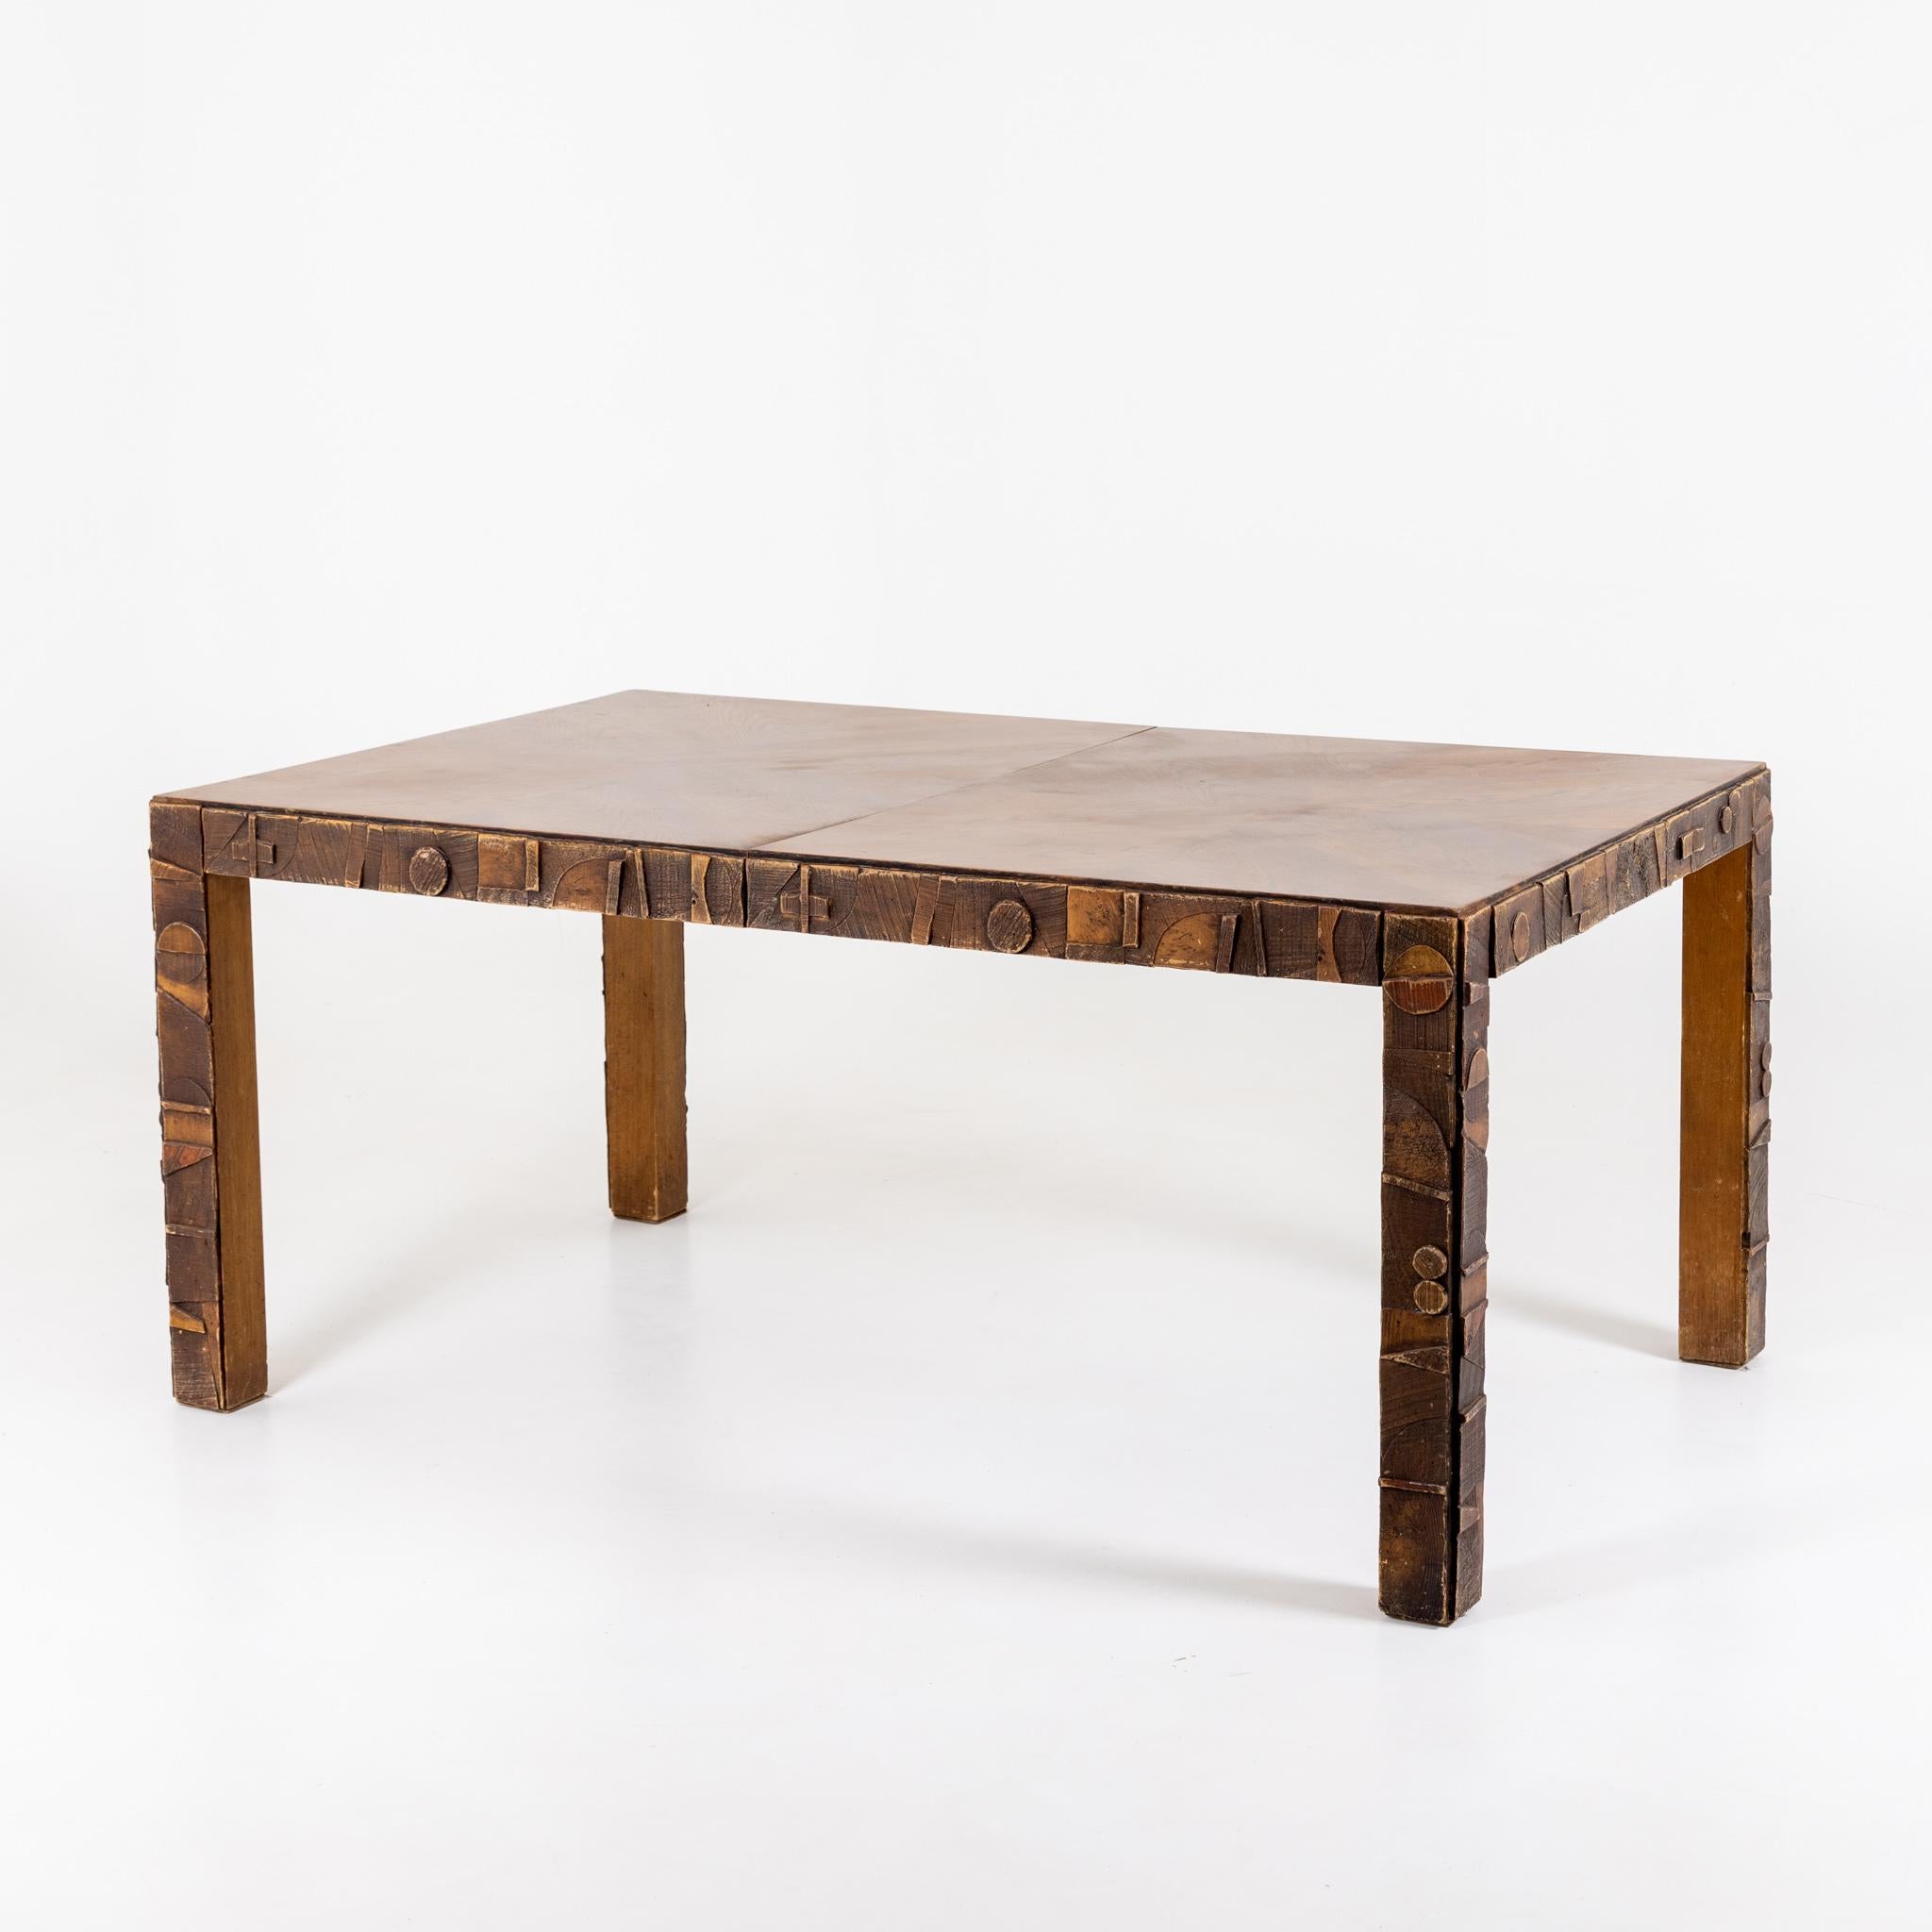 Large dining table carved from wood with extendable table top in brutalist design. Label on the underside, numbered 61901.